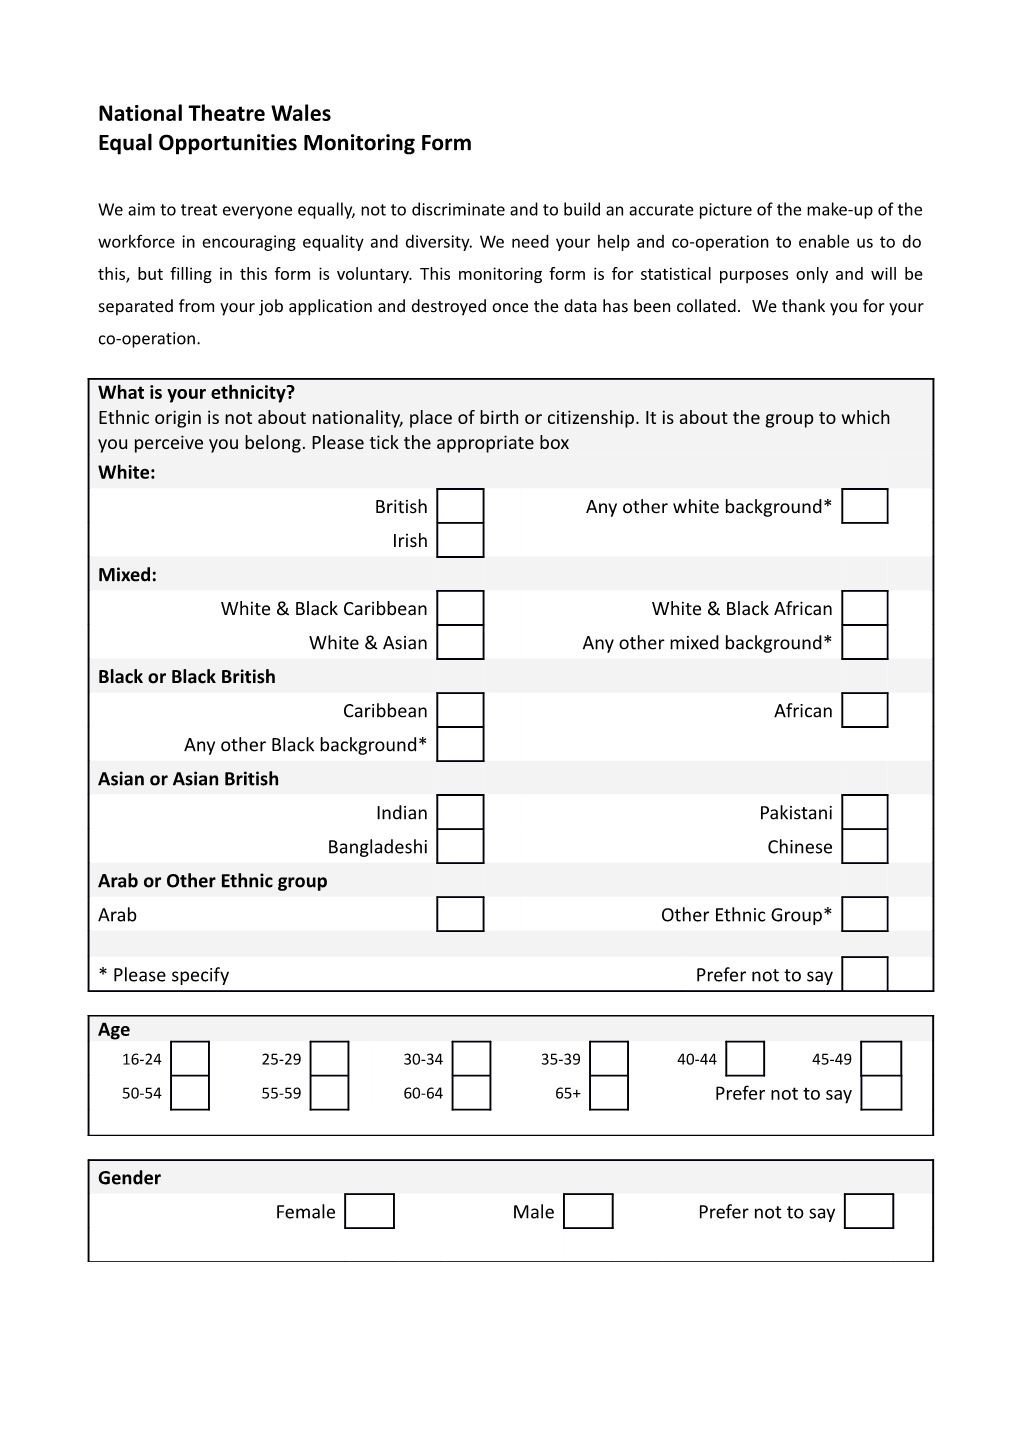 Equal Opportunities Monitoring Form s2